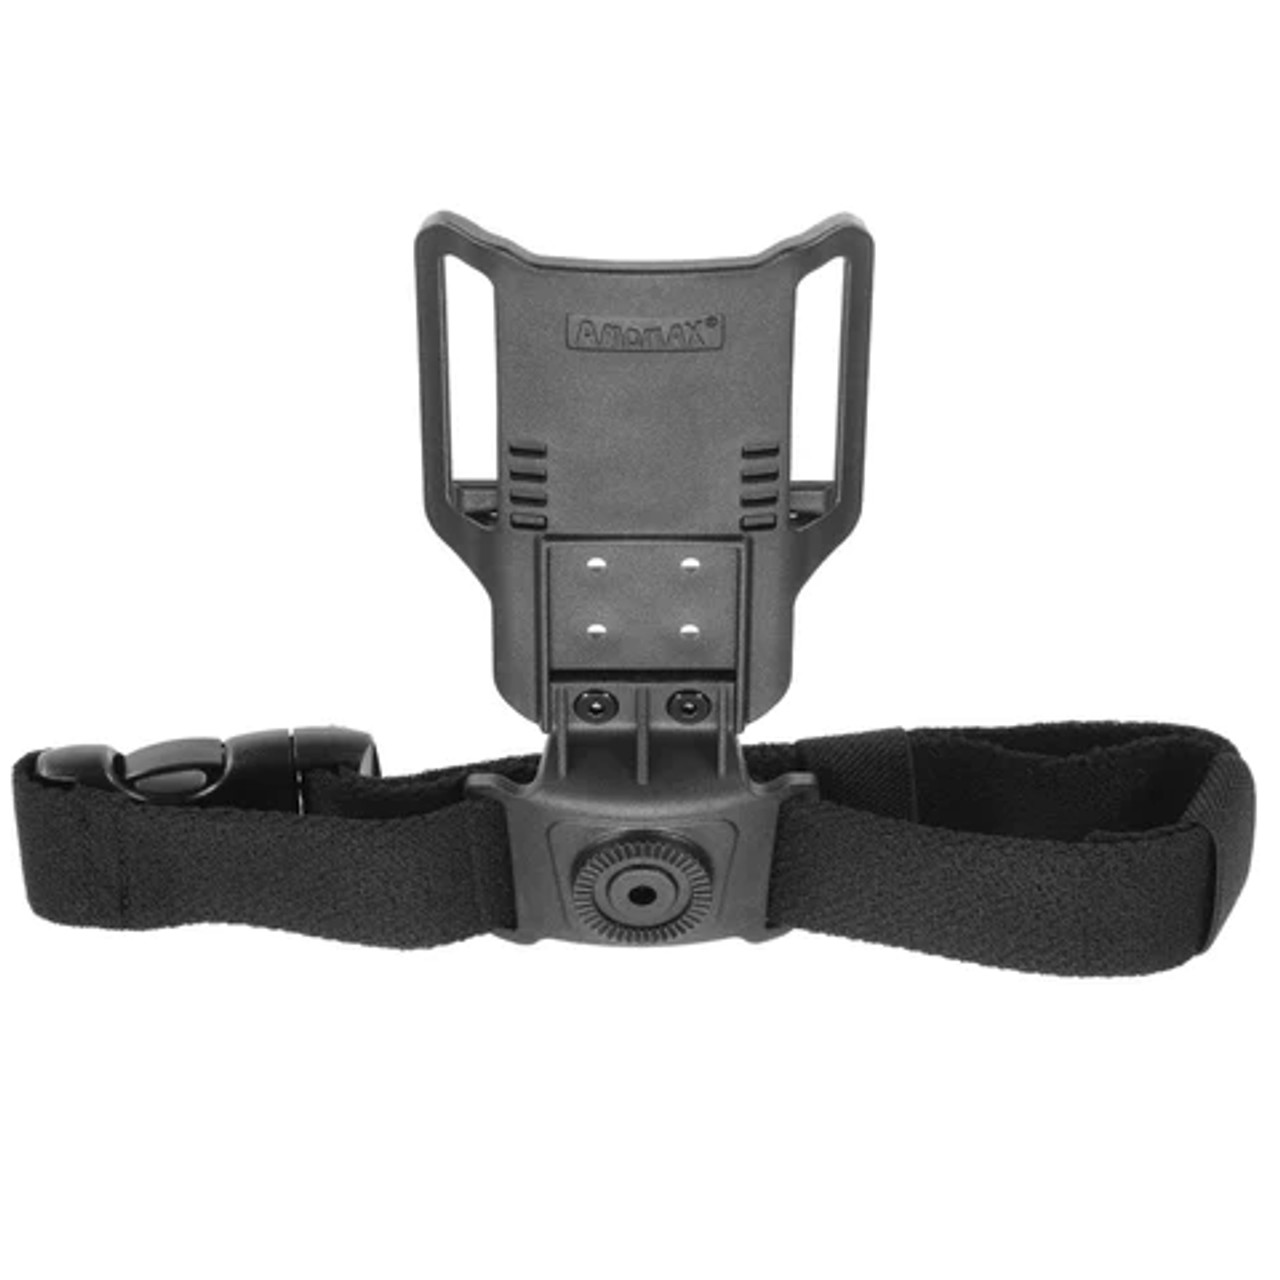 Amomax Low Ride Duty Drop Holster Attachment – Black